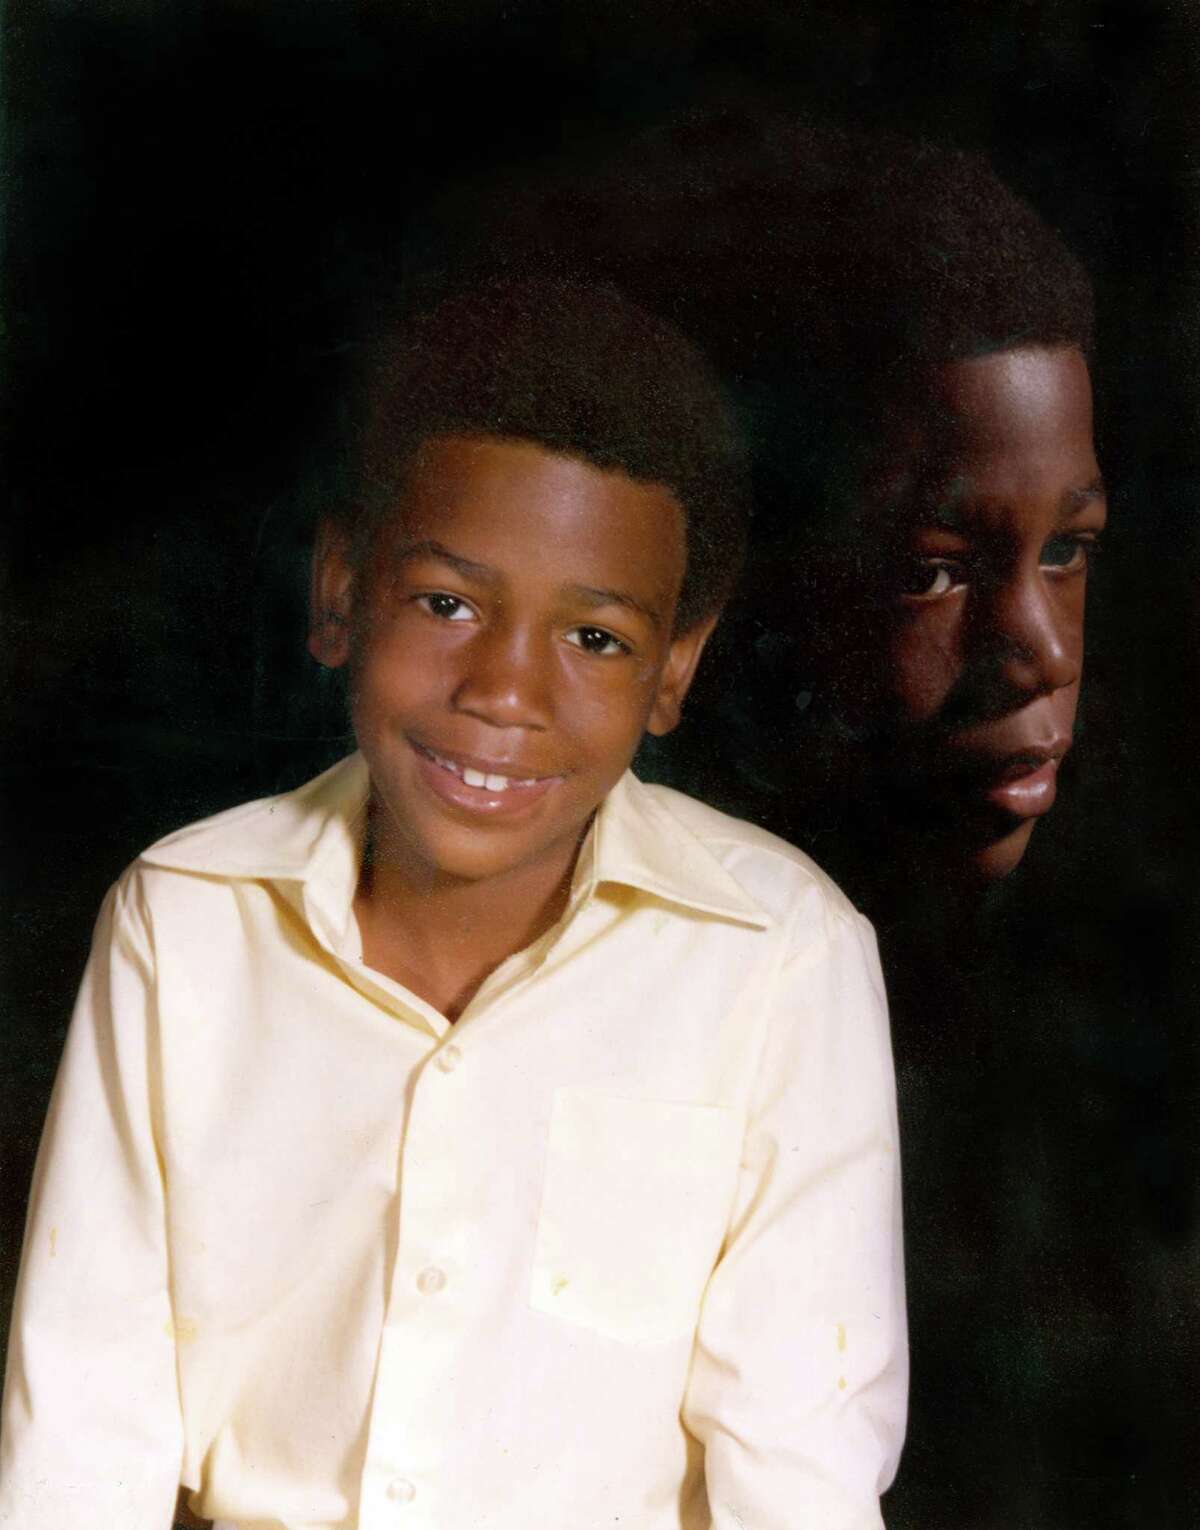 Kevin Ollie in his first grade photo.